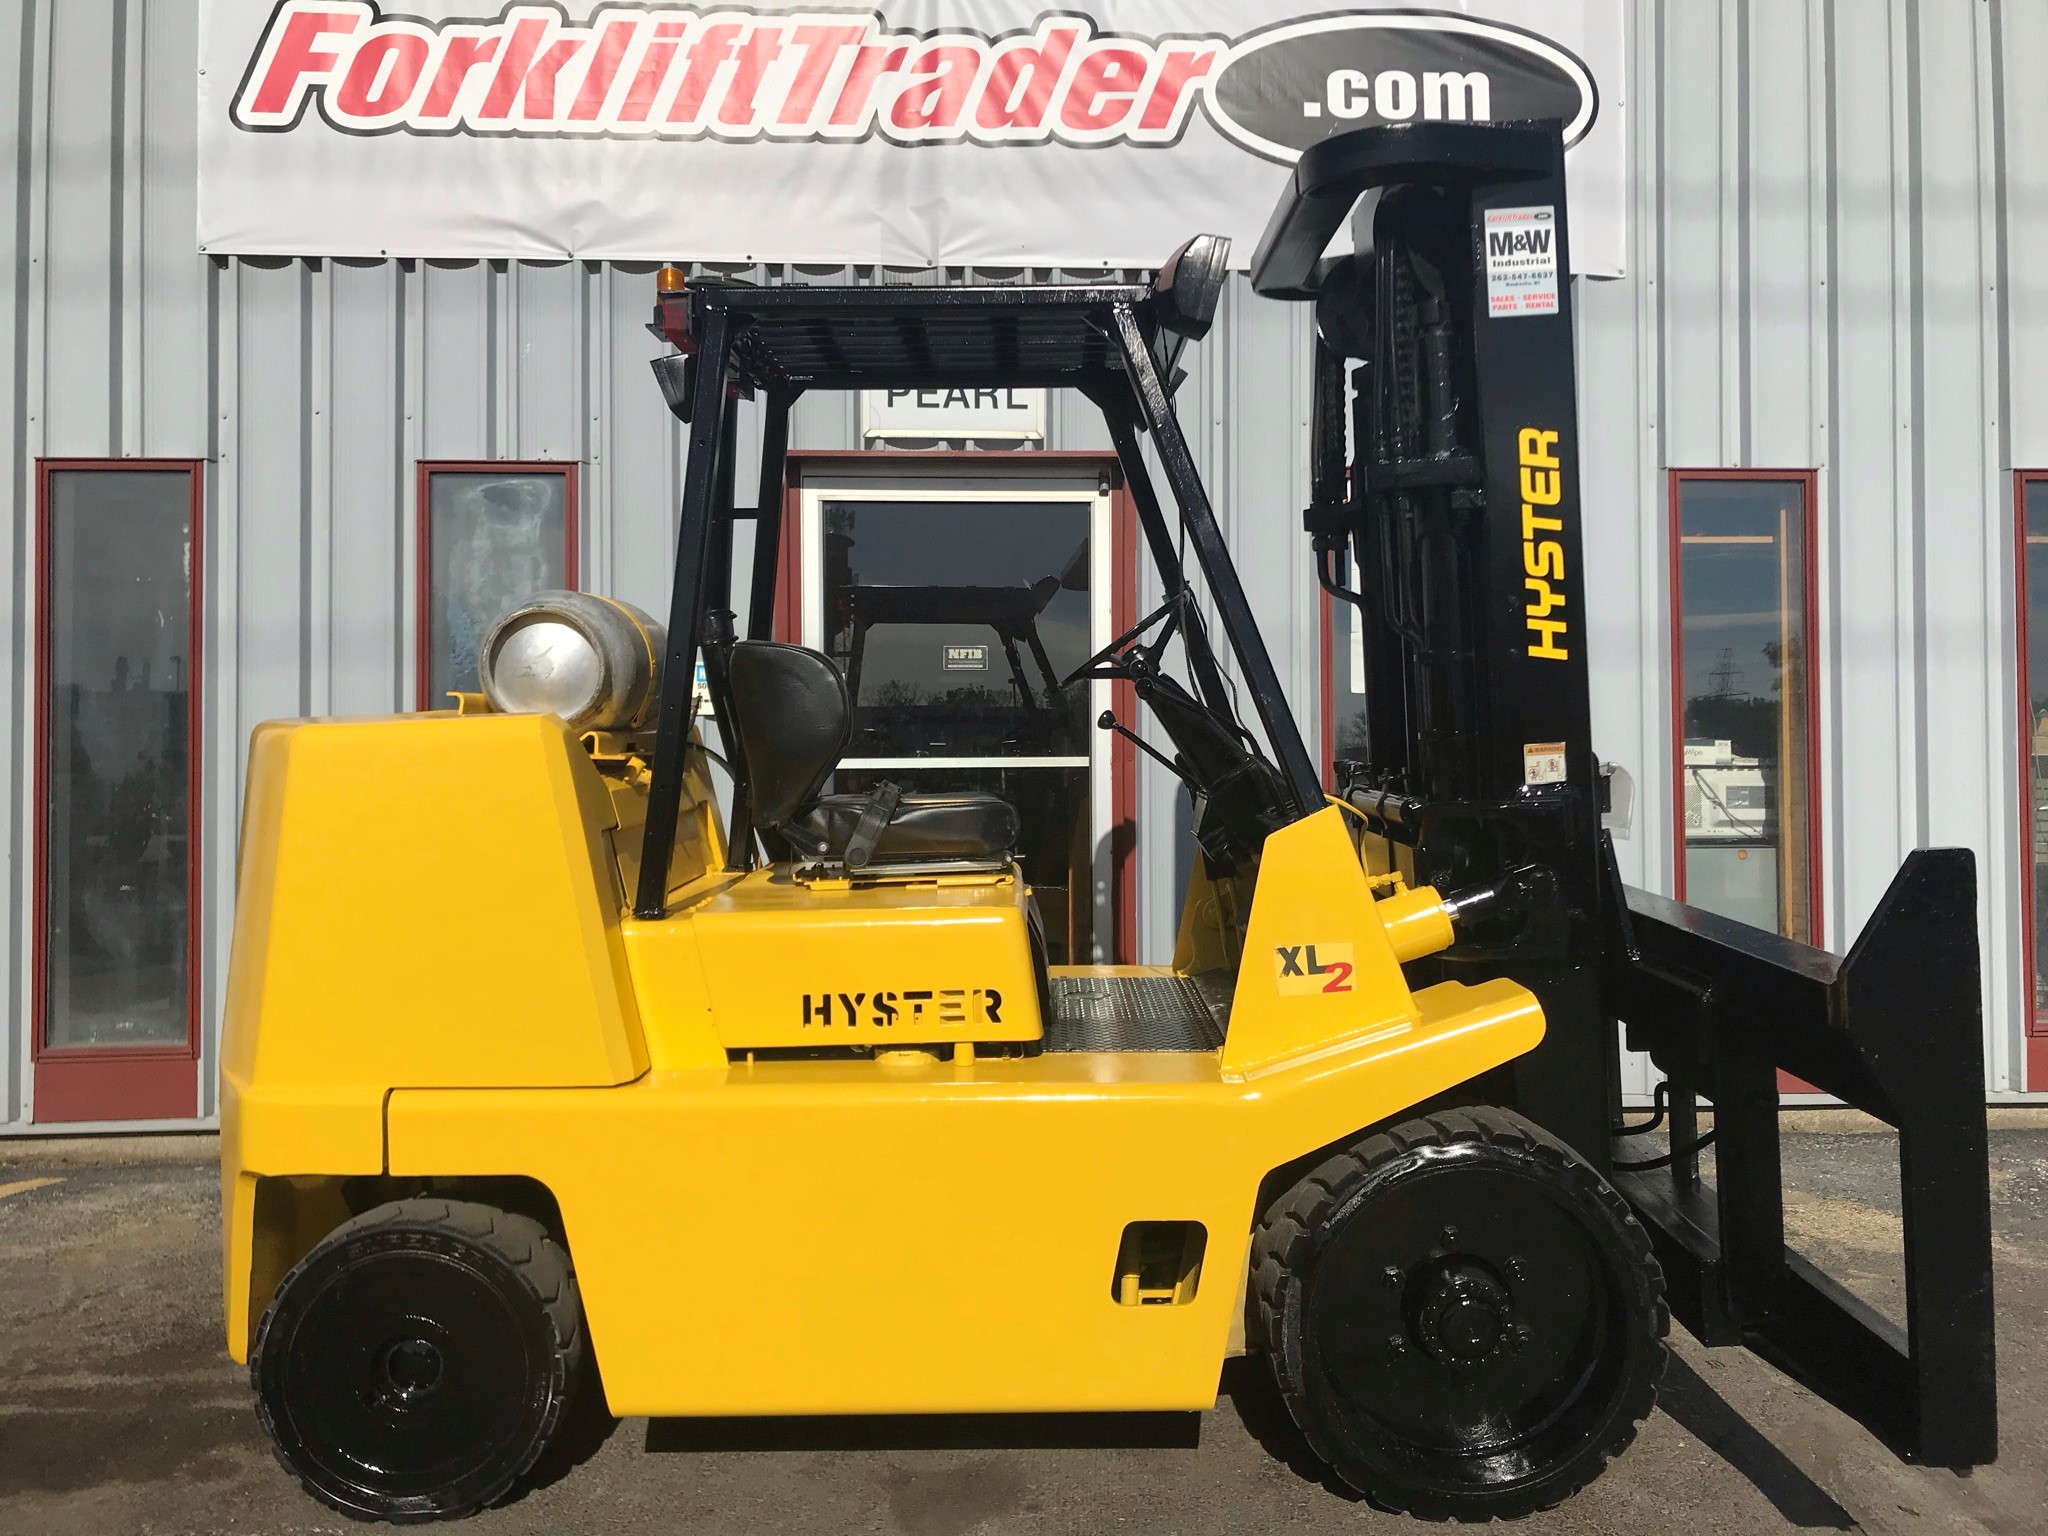 Power steering yellow 1999 hyster forklift for sale